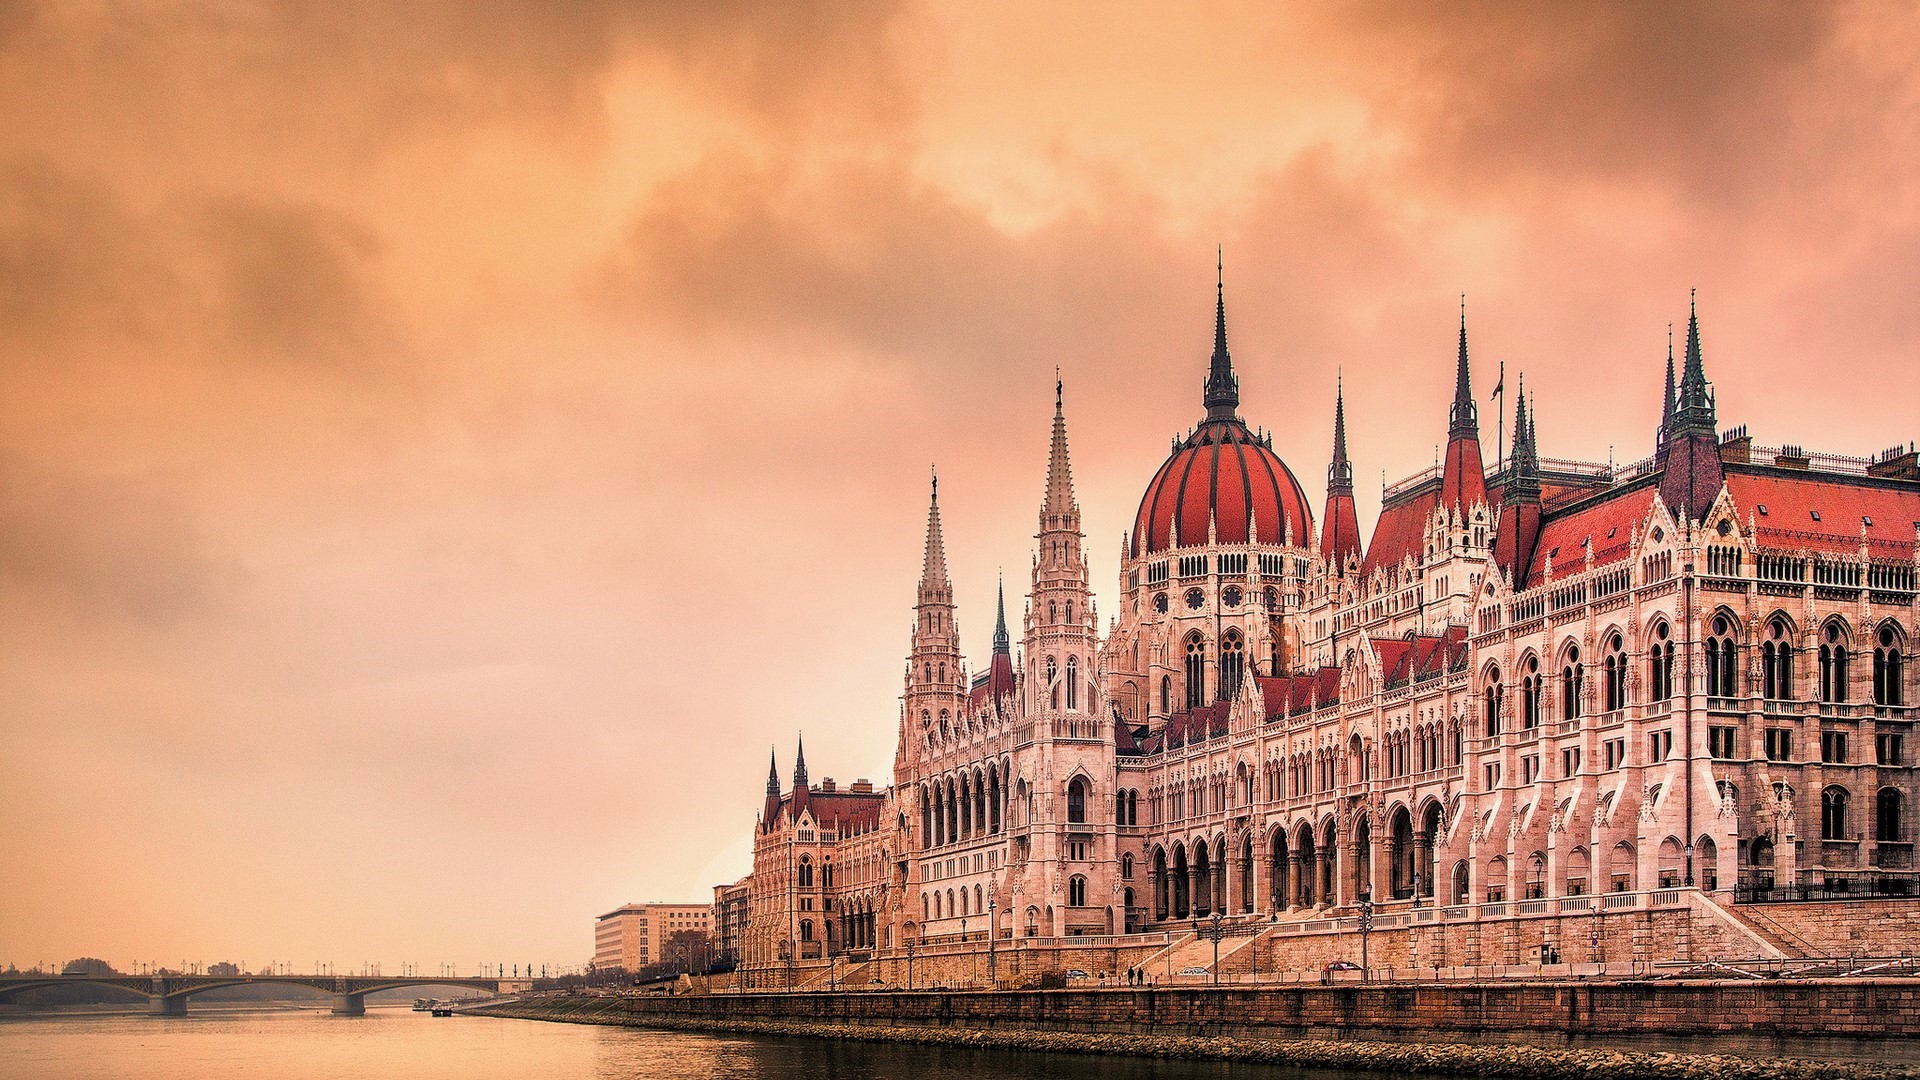 man made, hungarian parliament building, architecture, budapest, building, gothic, hungary, monuments